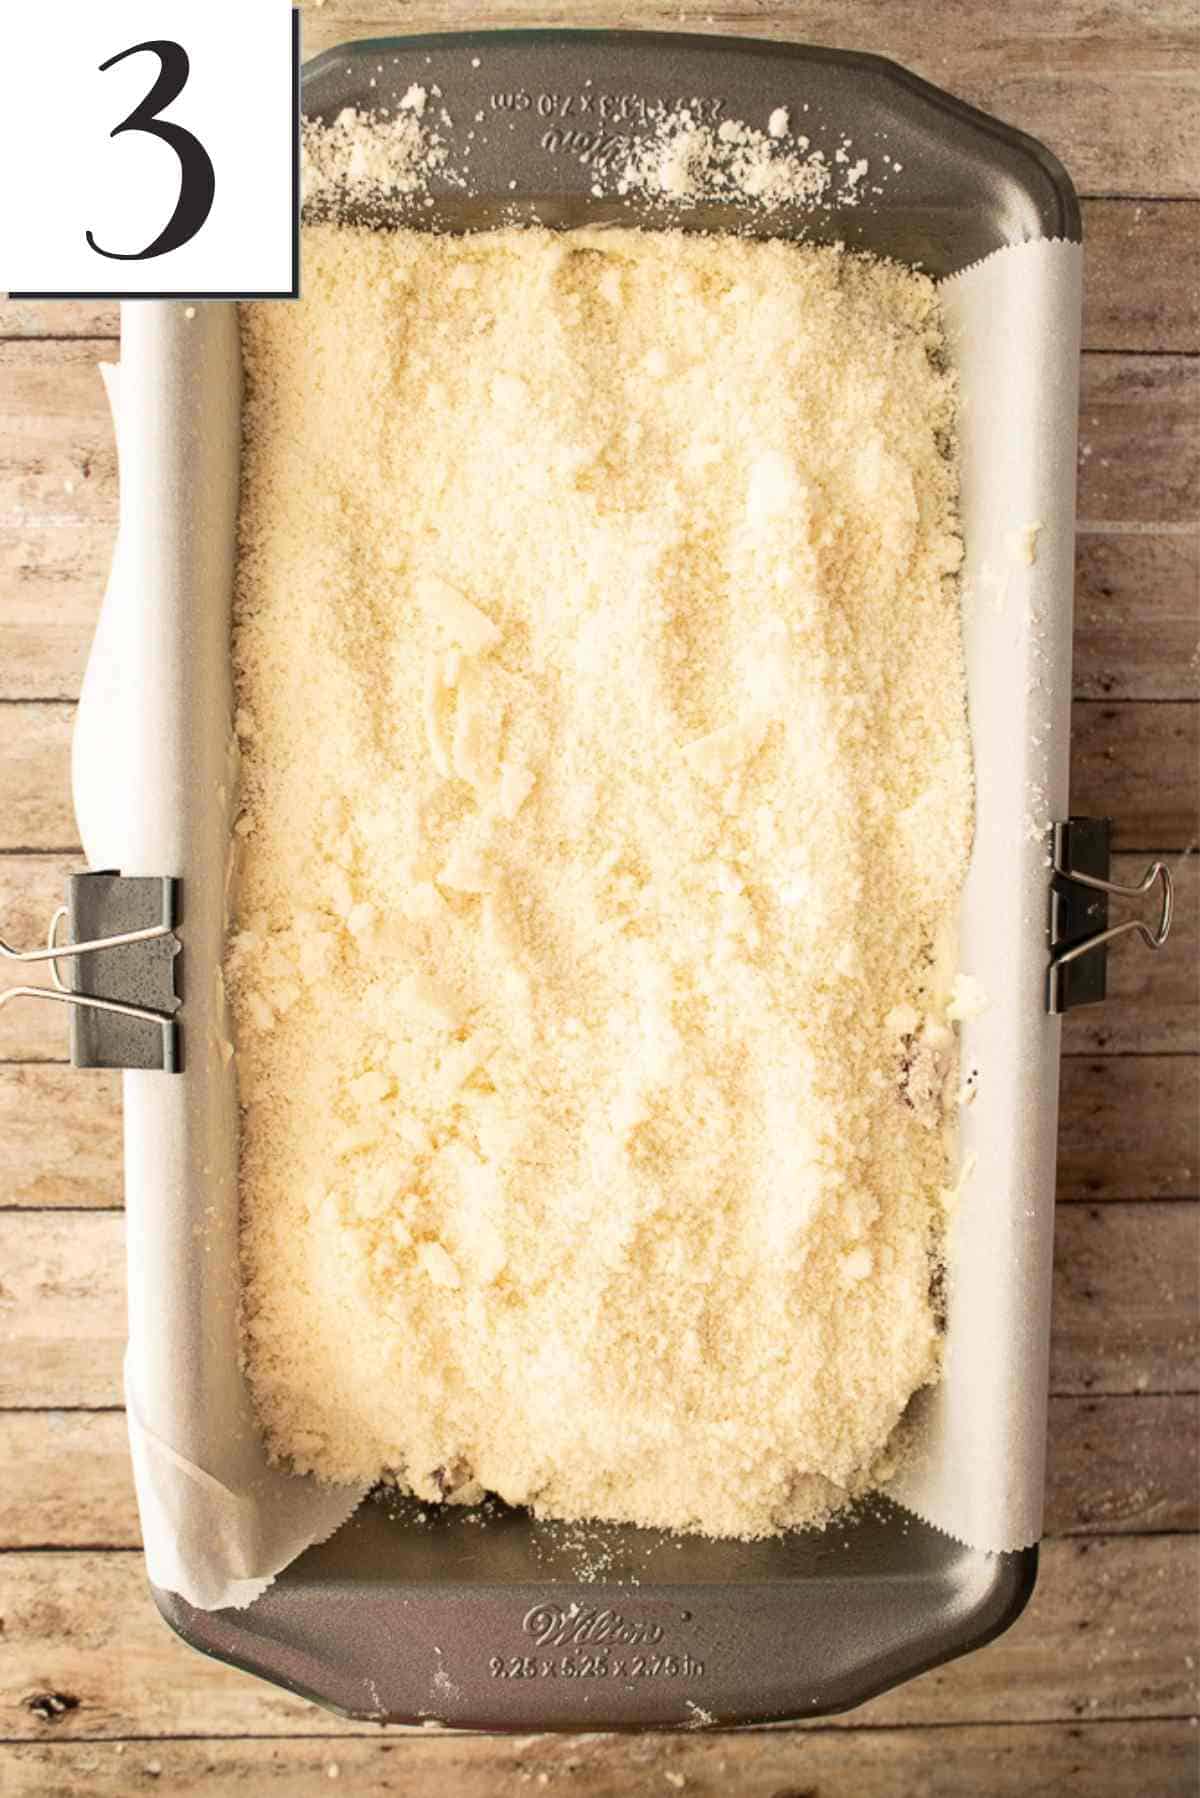 Batter spread into a loaf pan with topping evenly sprinkled across the top.